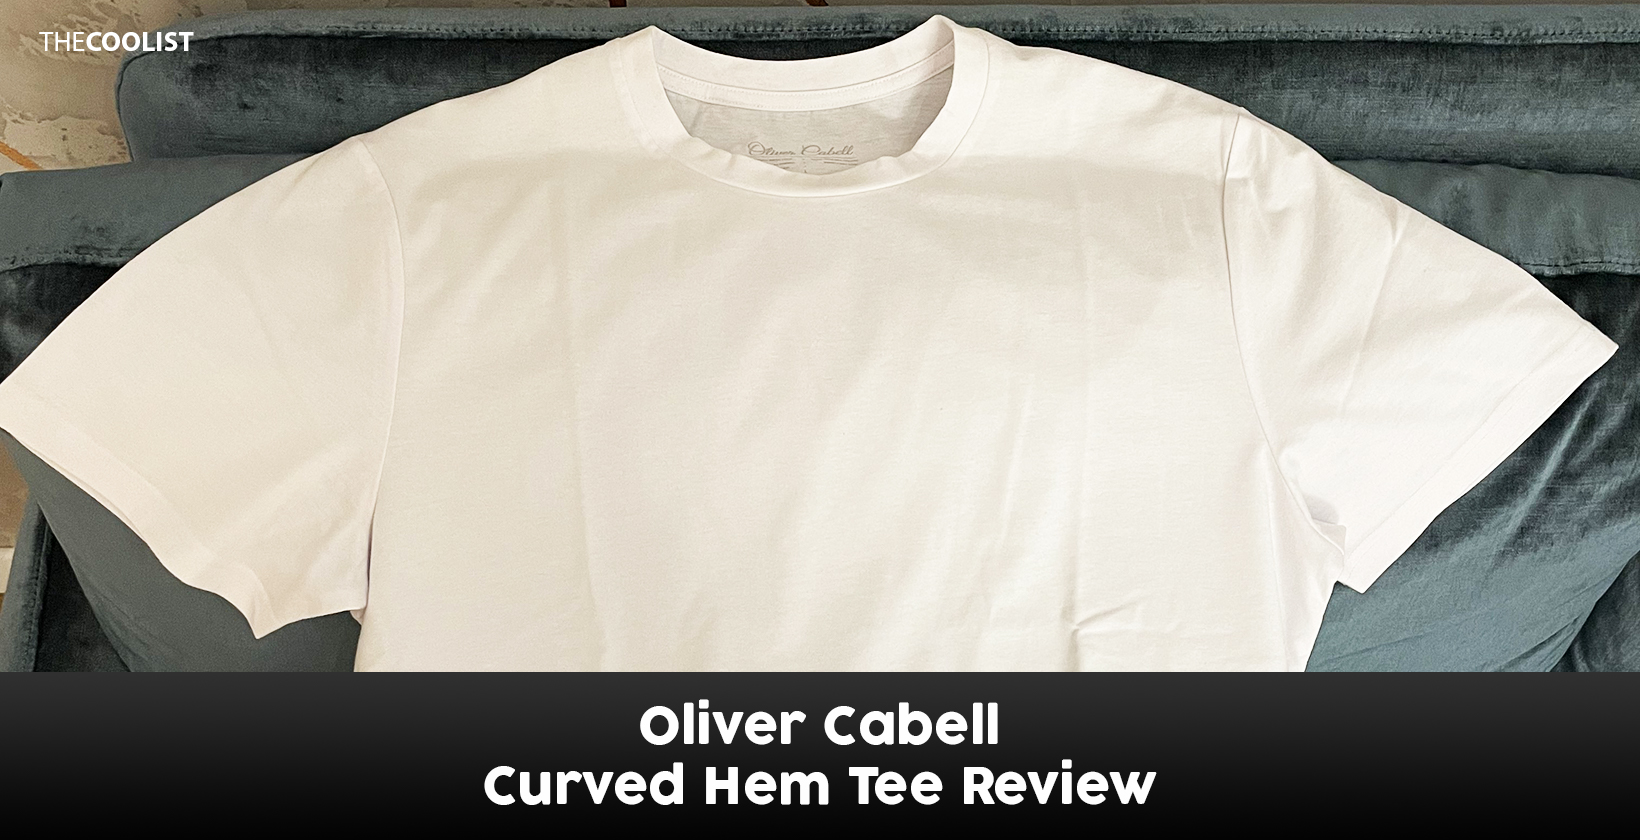 Men’s fashion review of Oliver Cabell shirt